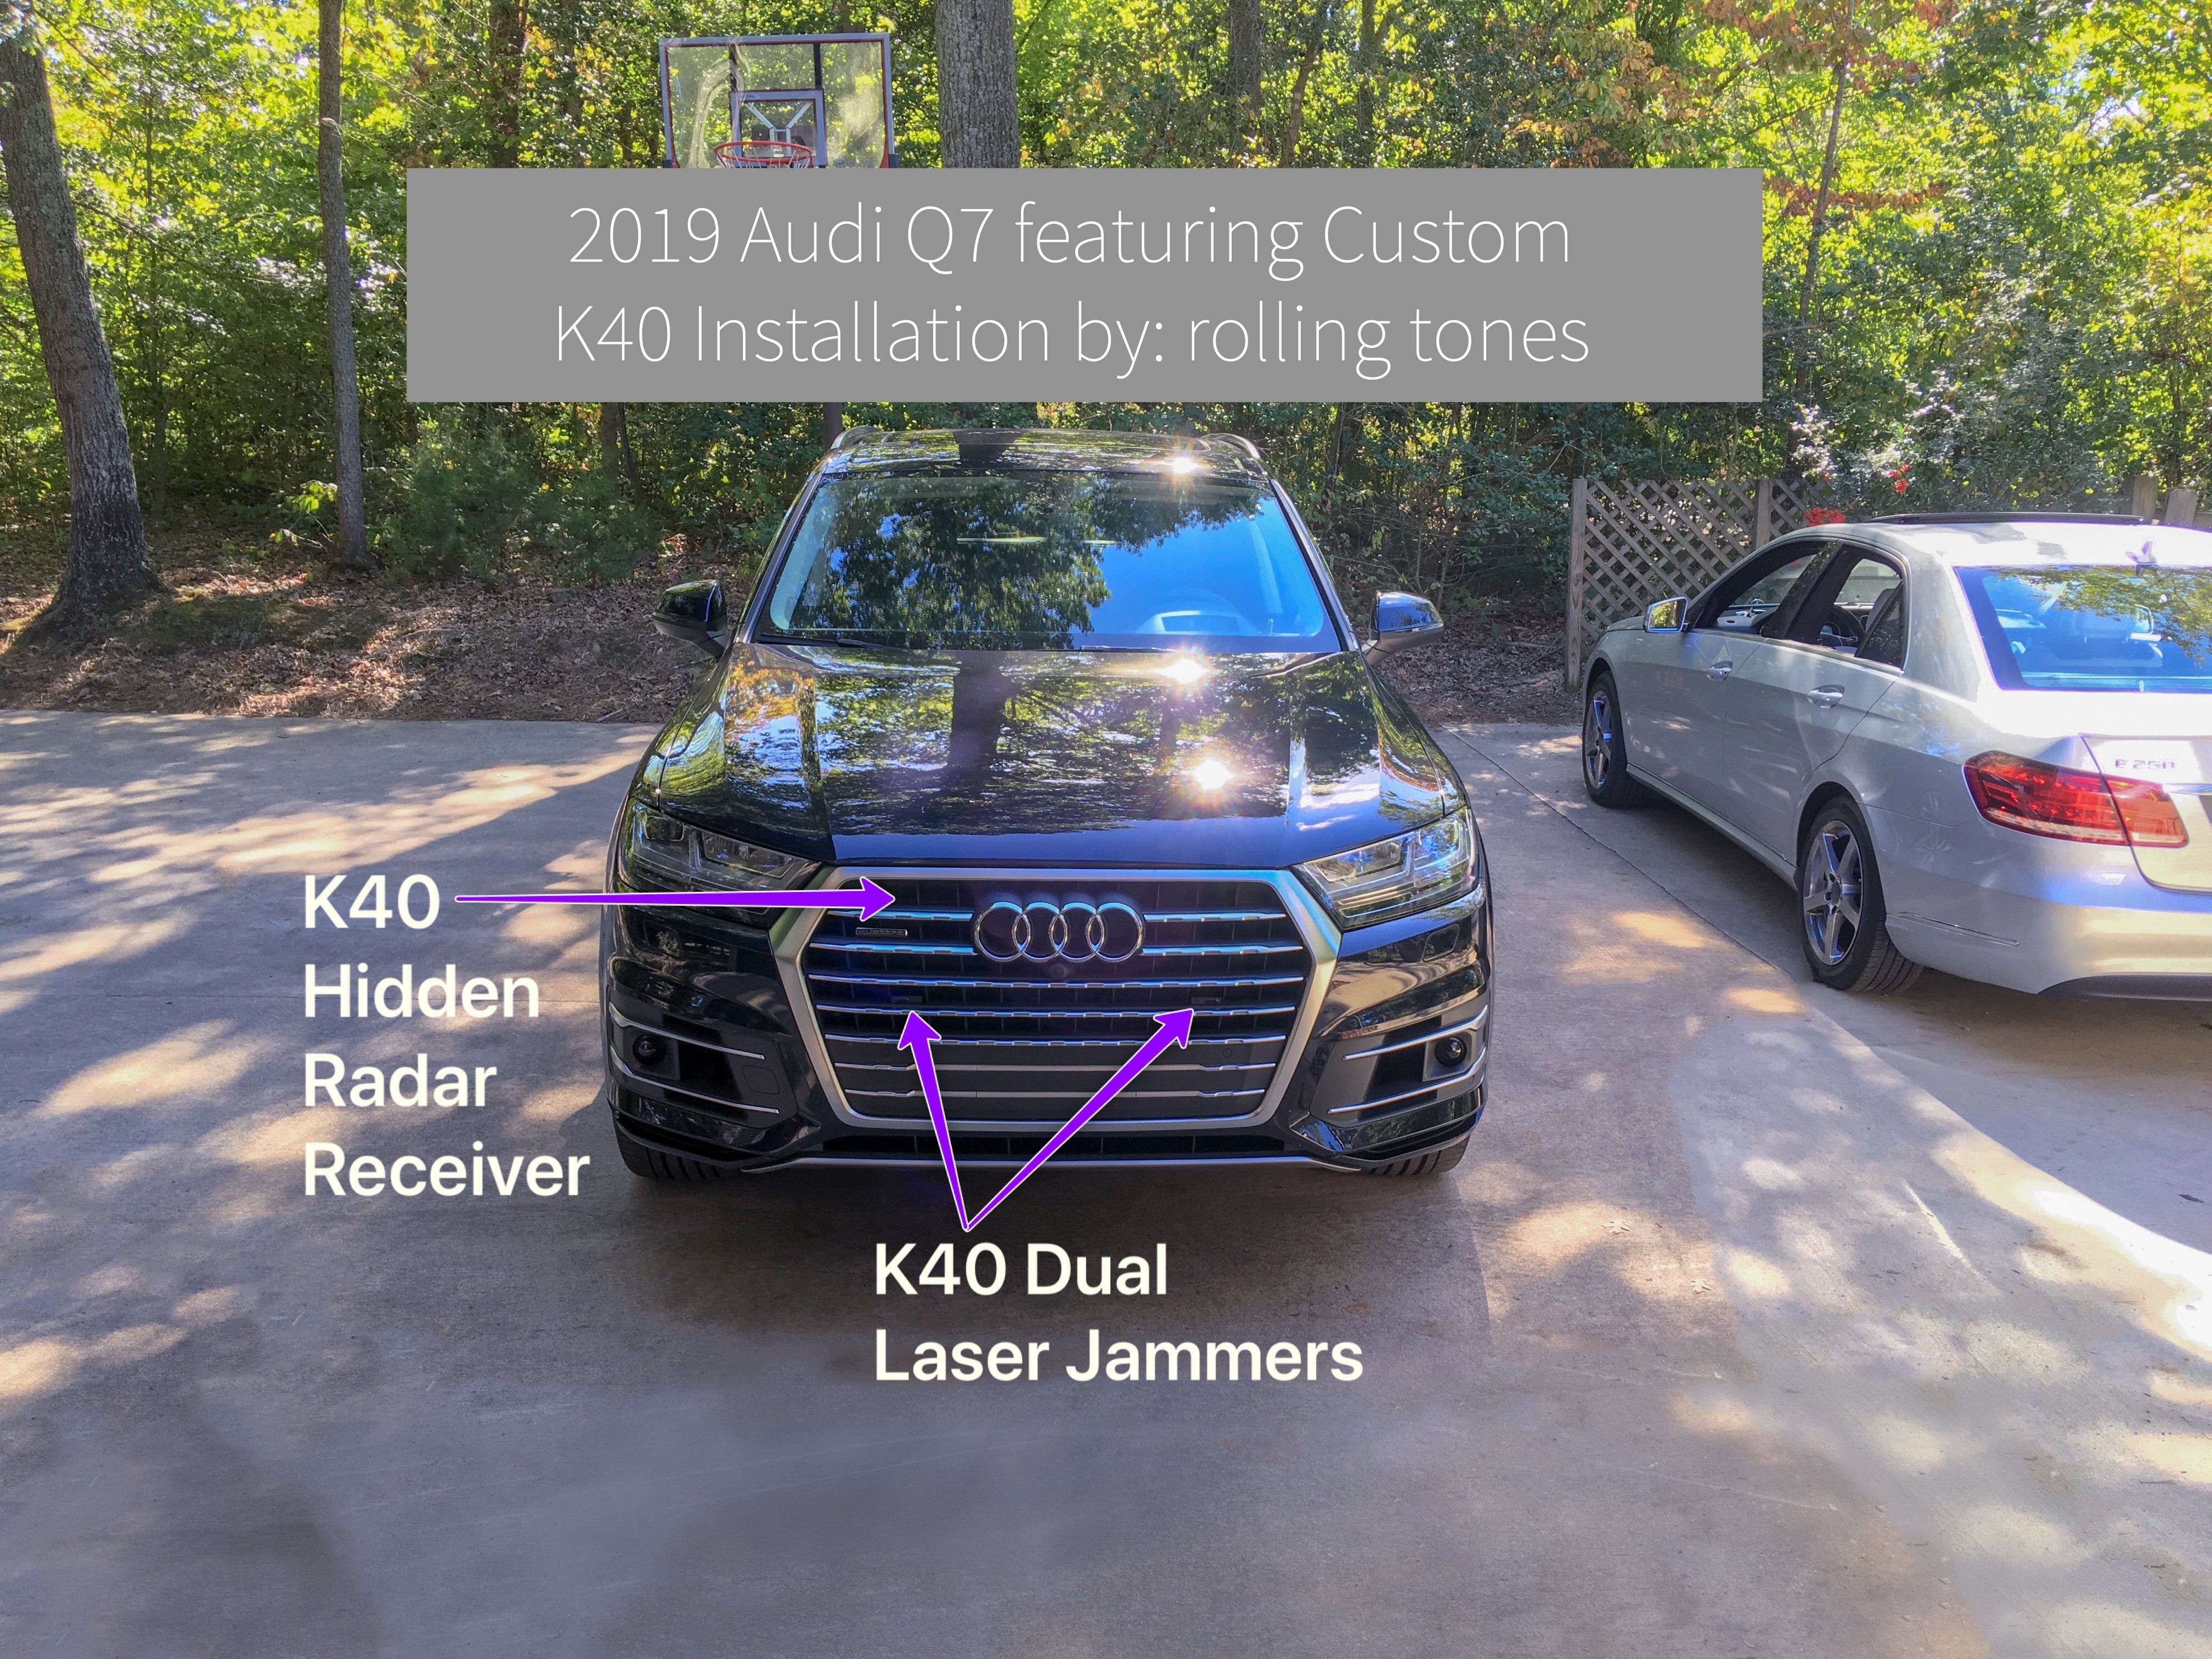 Custom K40 Police Laser Jammers and Hidden Radar Receiver Front Installed on 2019 Audi Q7 in Charlotte, NC